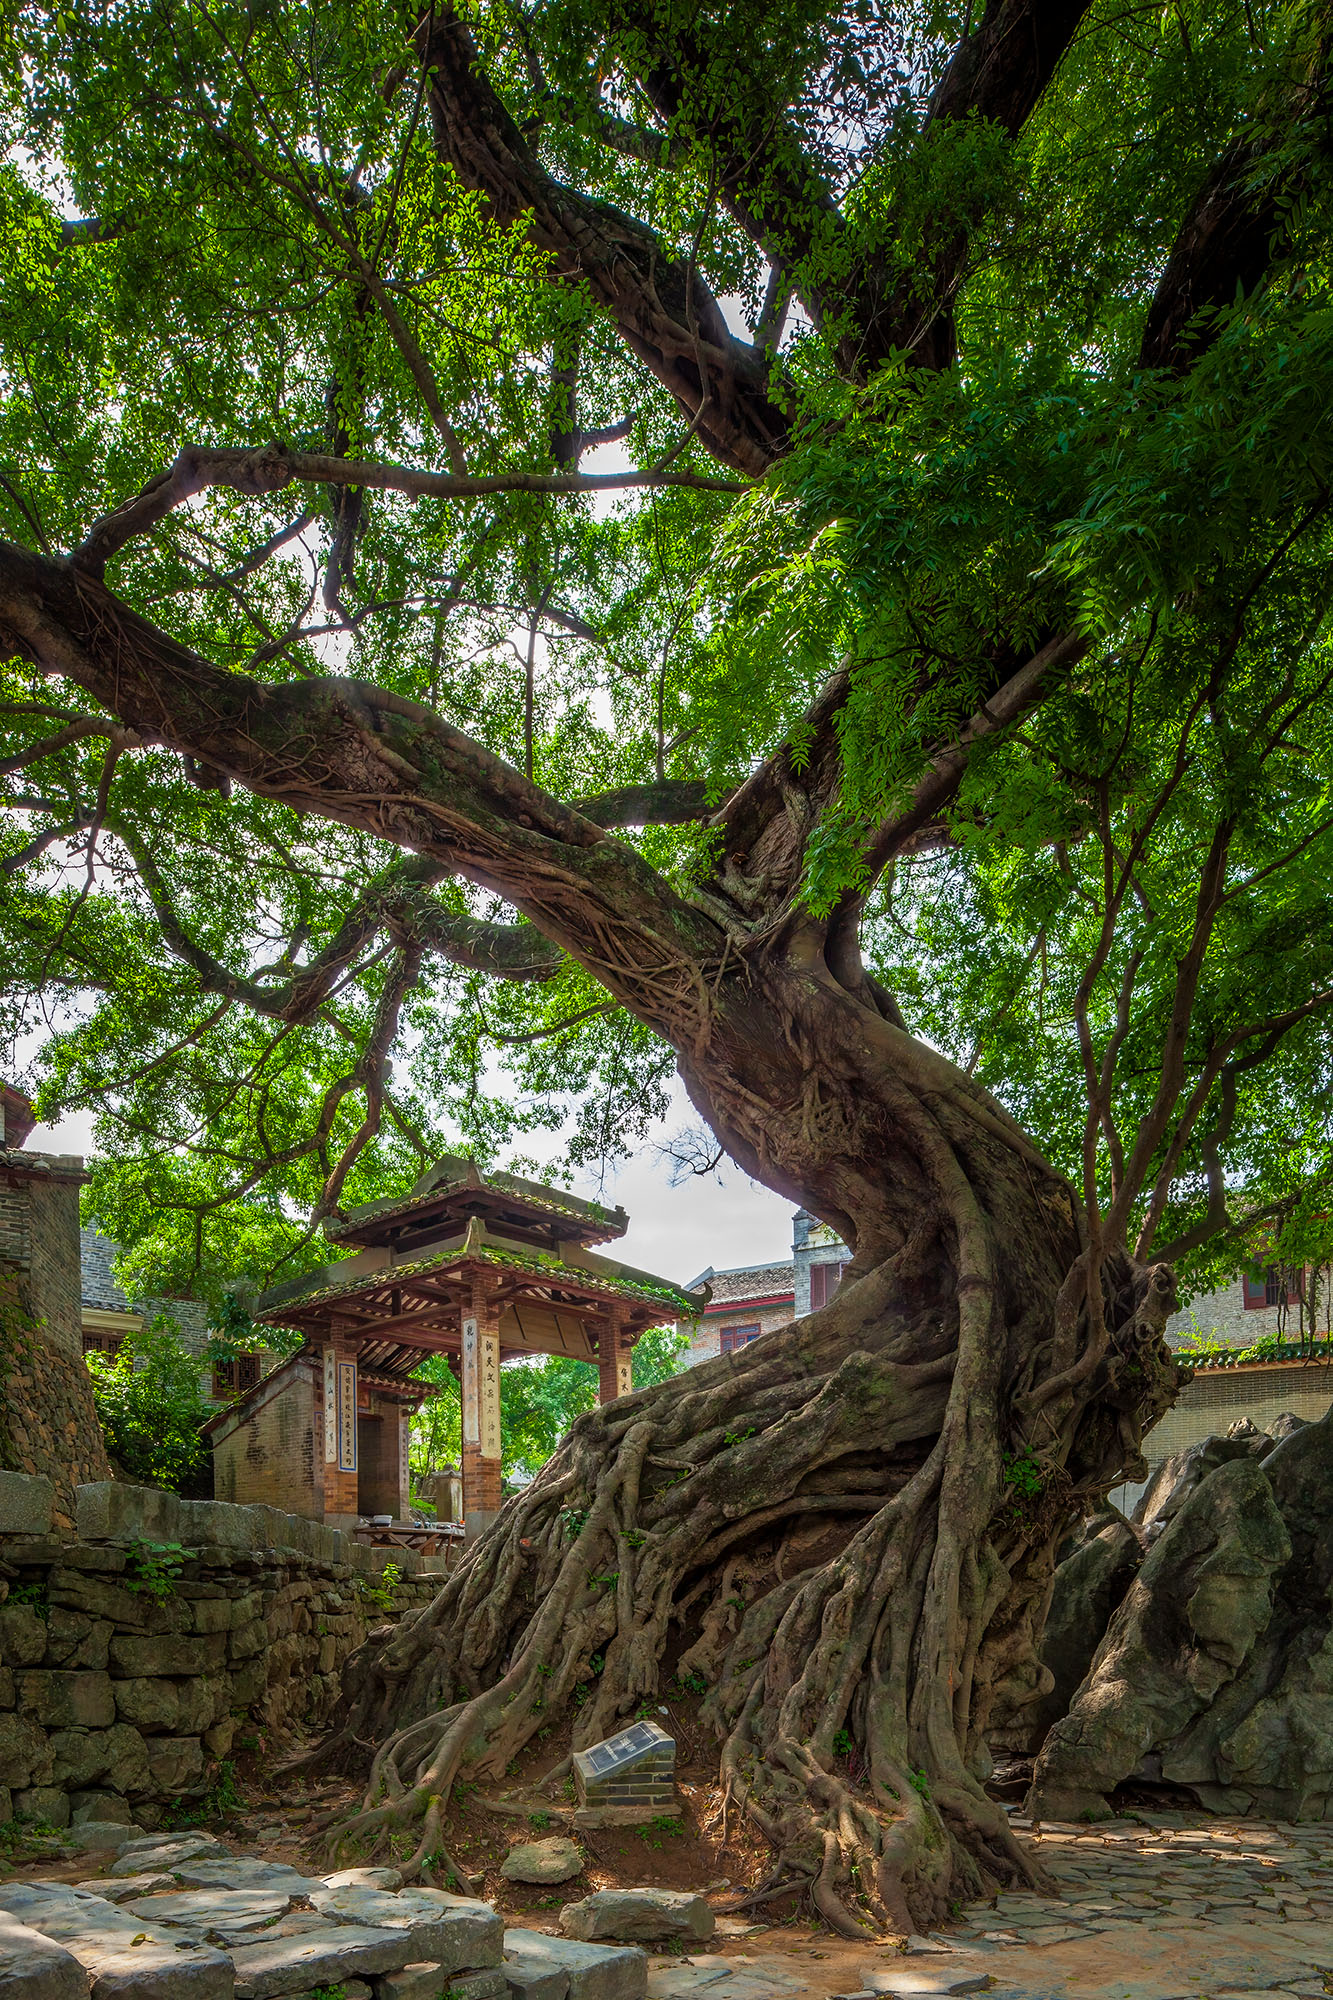 I saw several massive banyan trees during my travels in China. I found this 900 year old specimen in the thousand year old village...